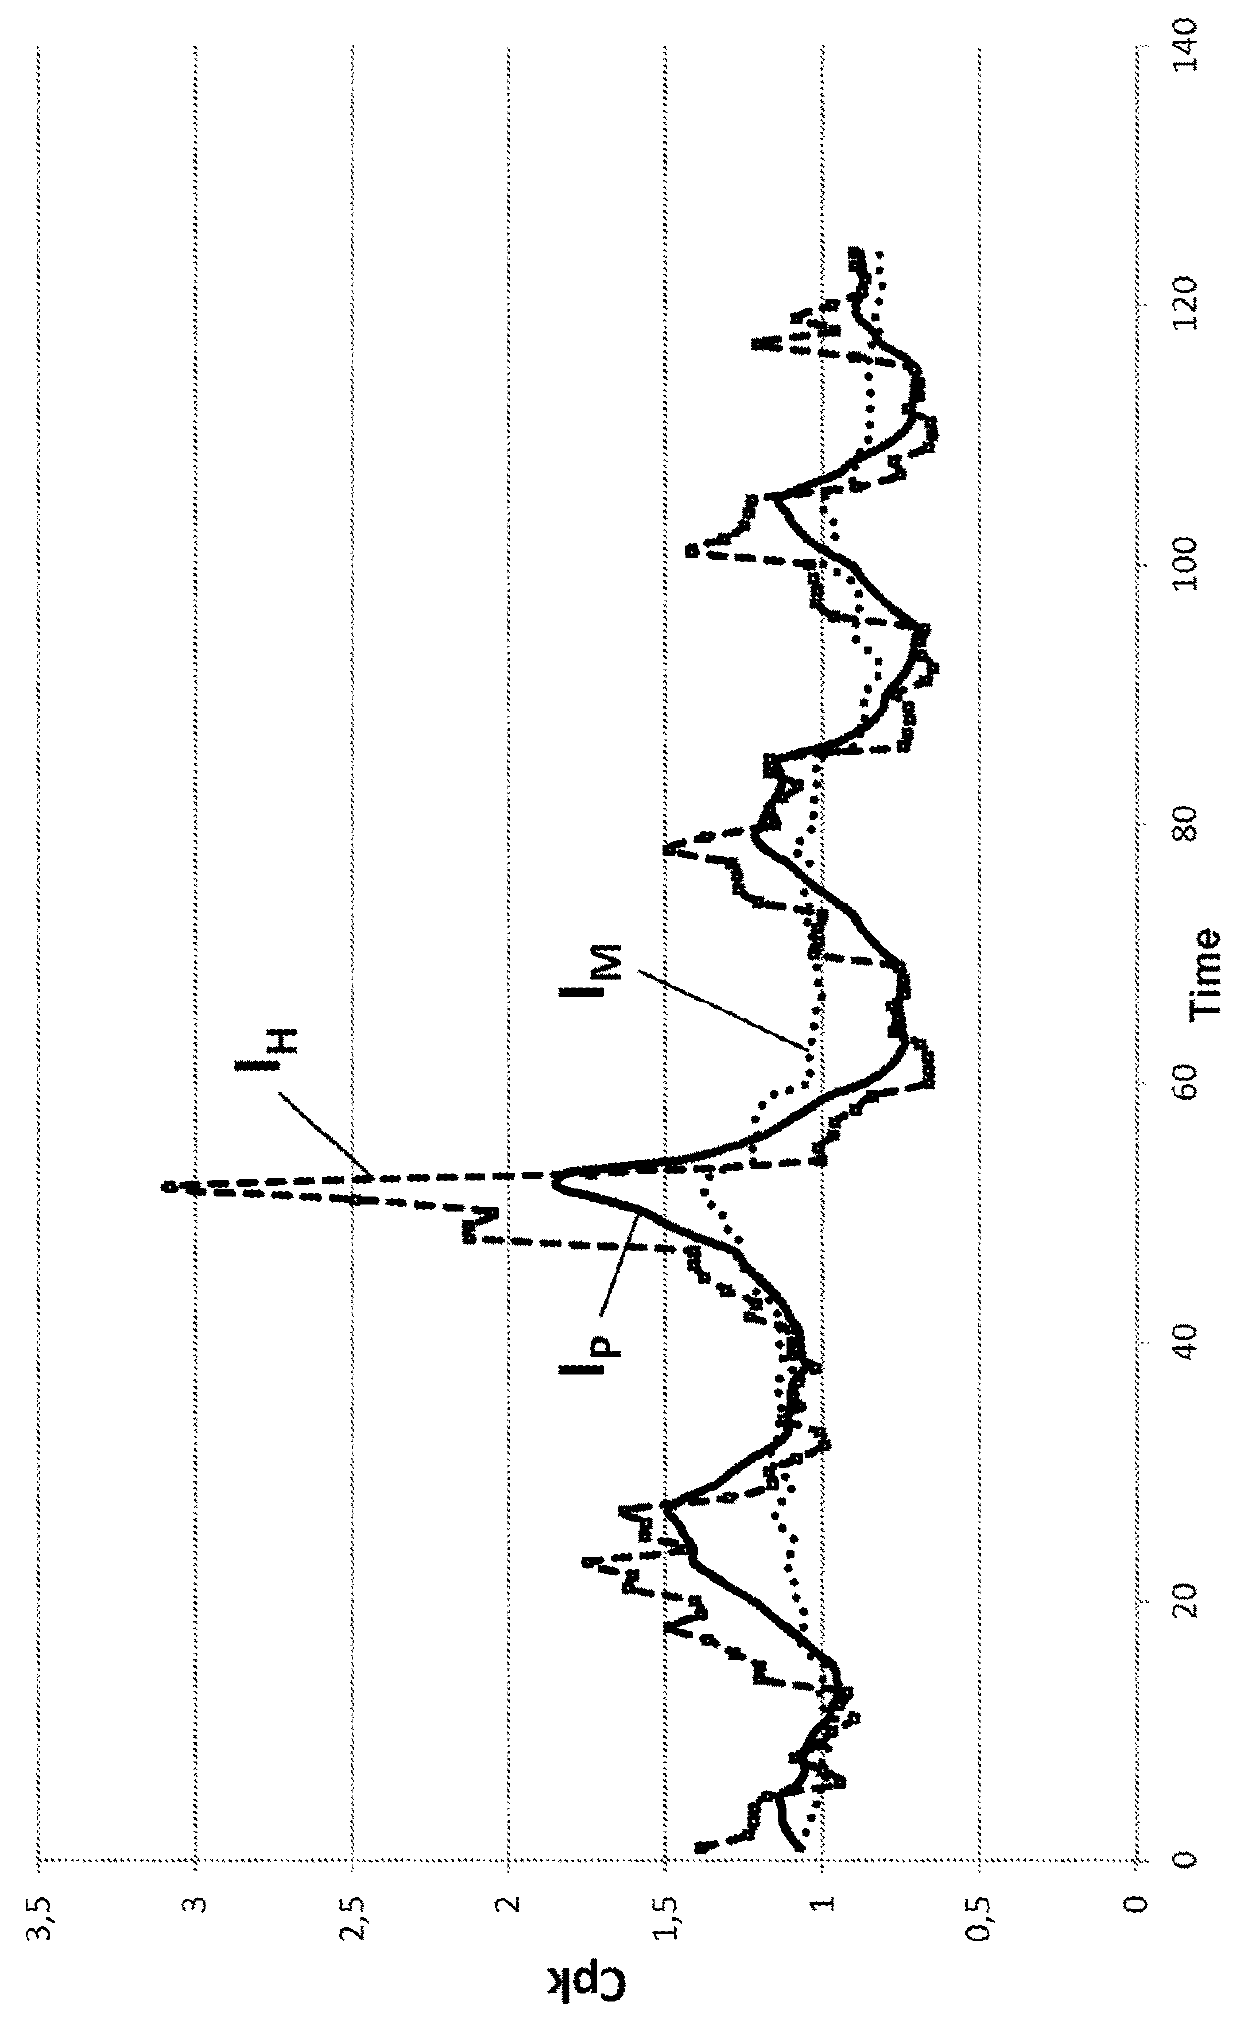 Method for manufacturing parts based on analysis of weighted statistical indicators